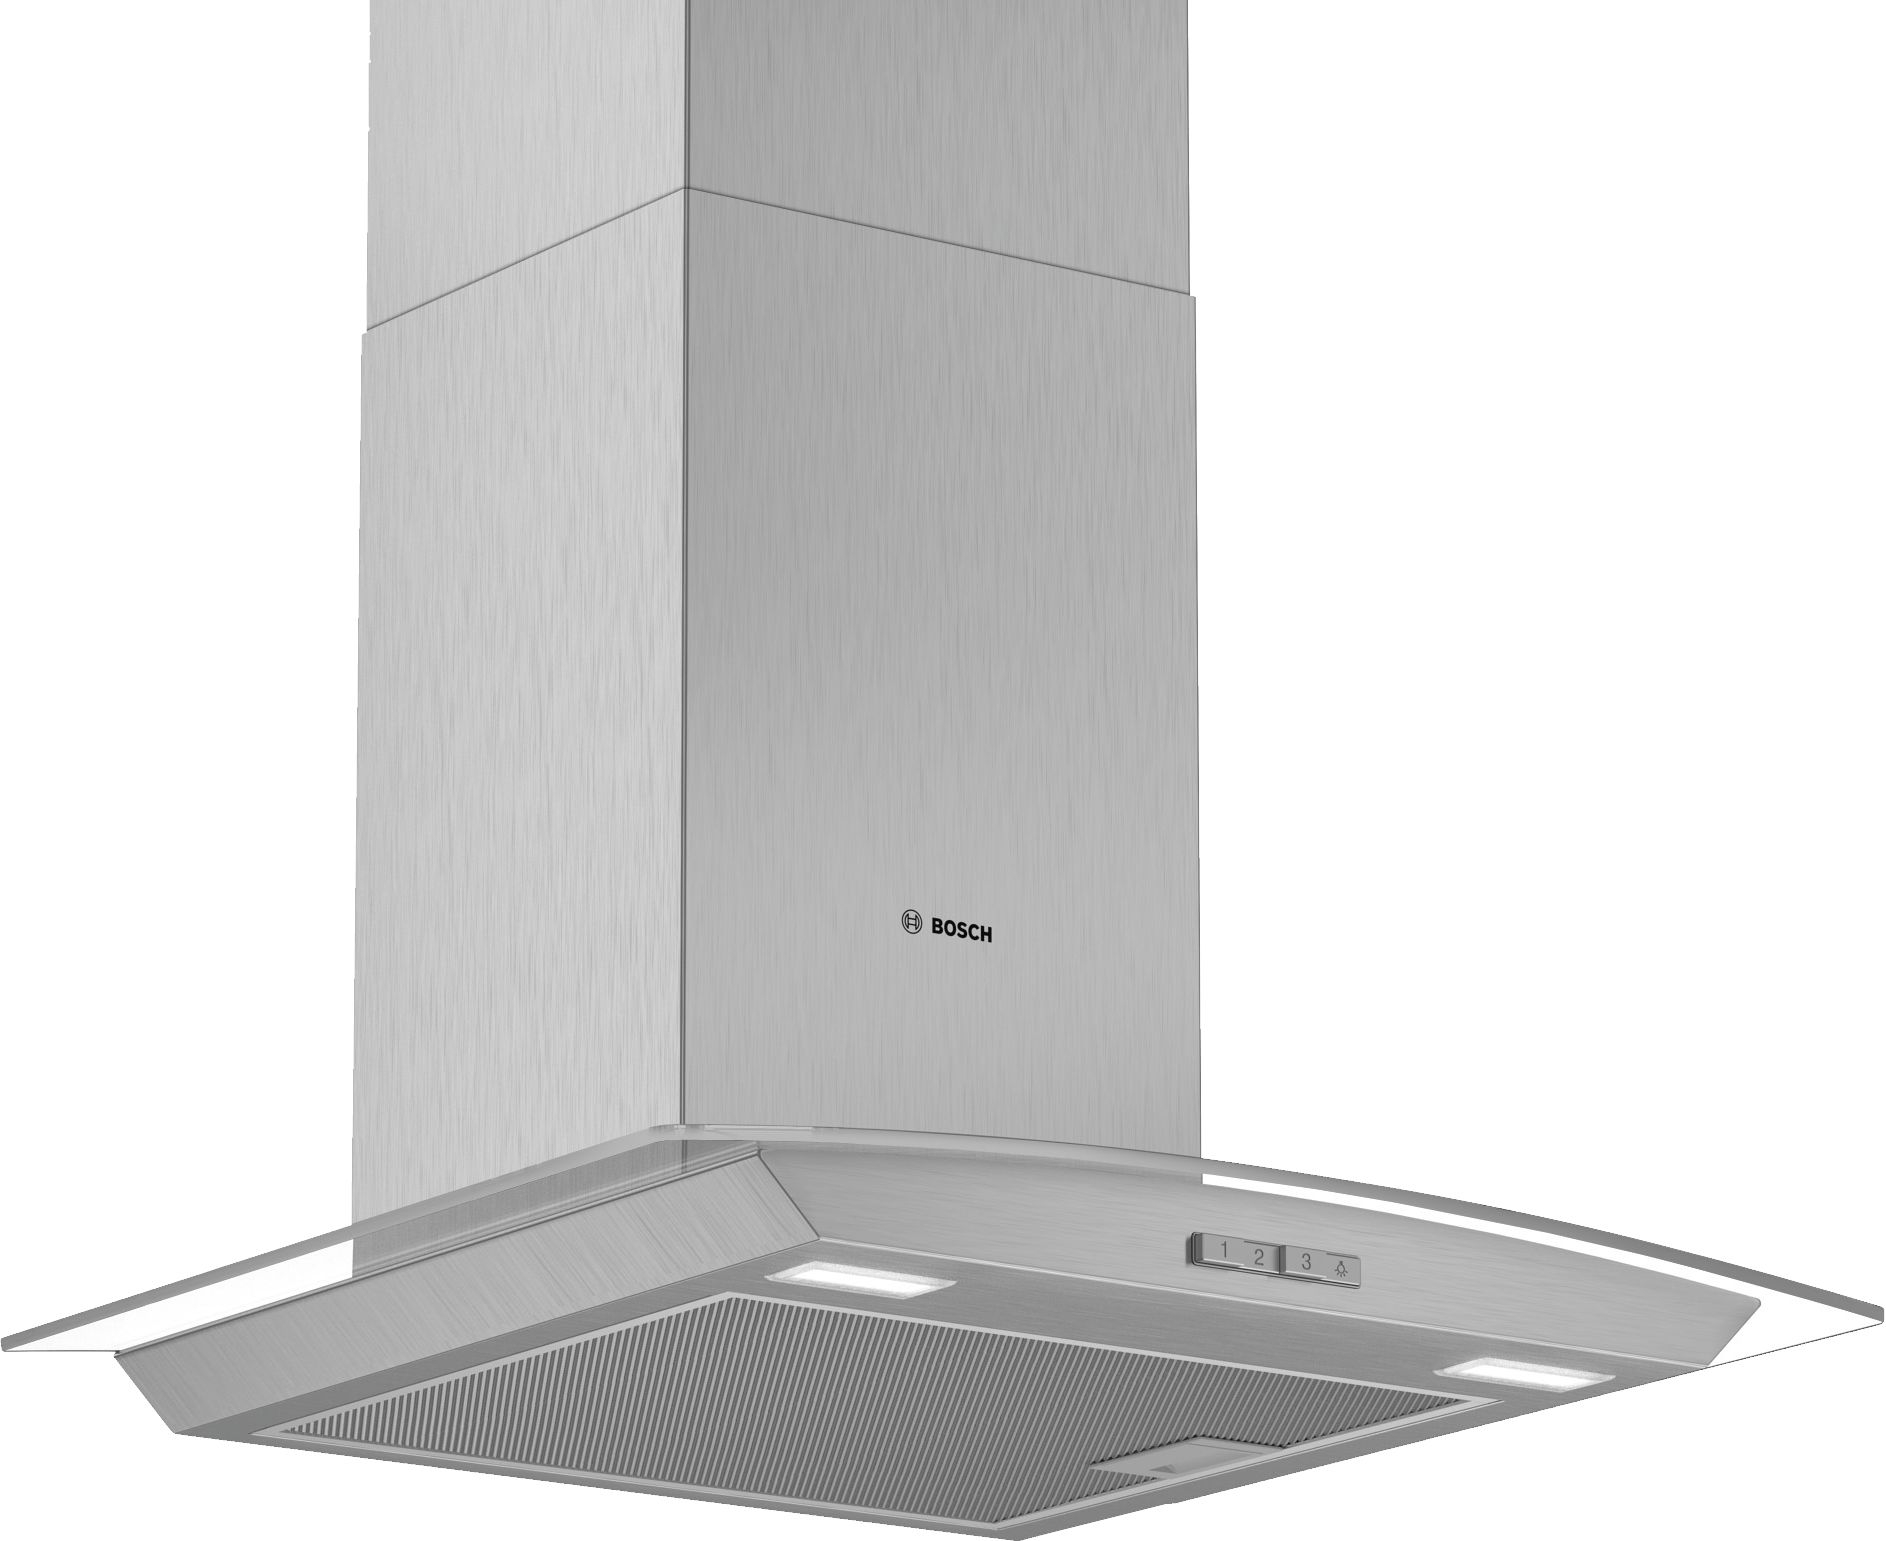 Bosch DWA64BC50B 60cm wide, curved glass canopy, push buttons, 3 speeds, LED lights. Recirculating k